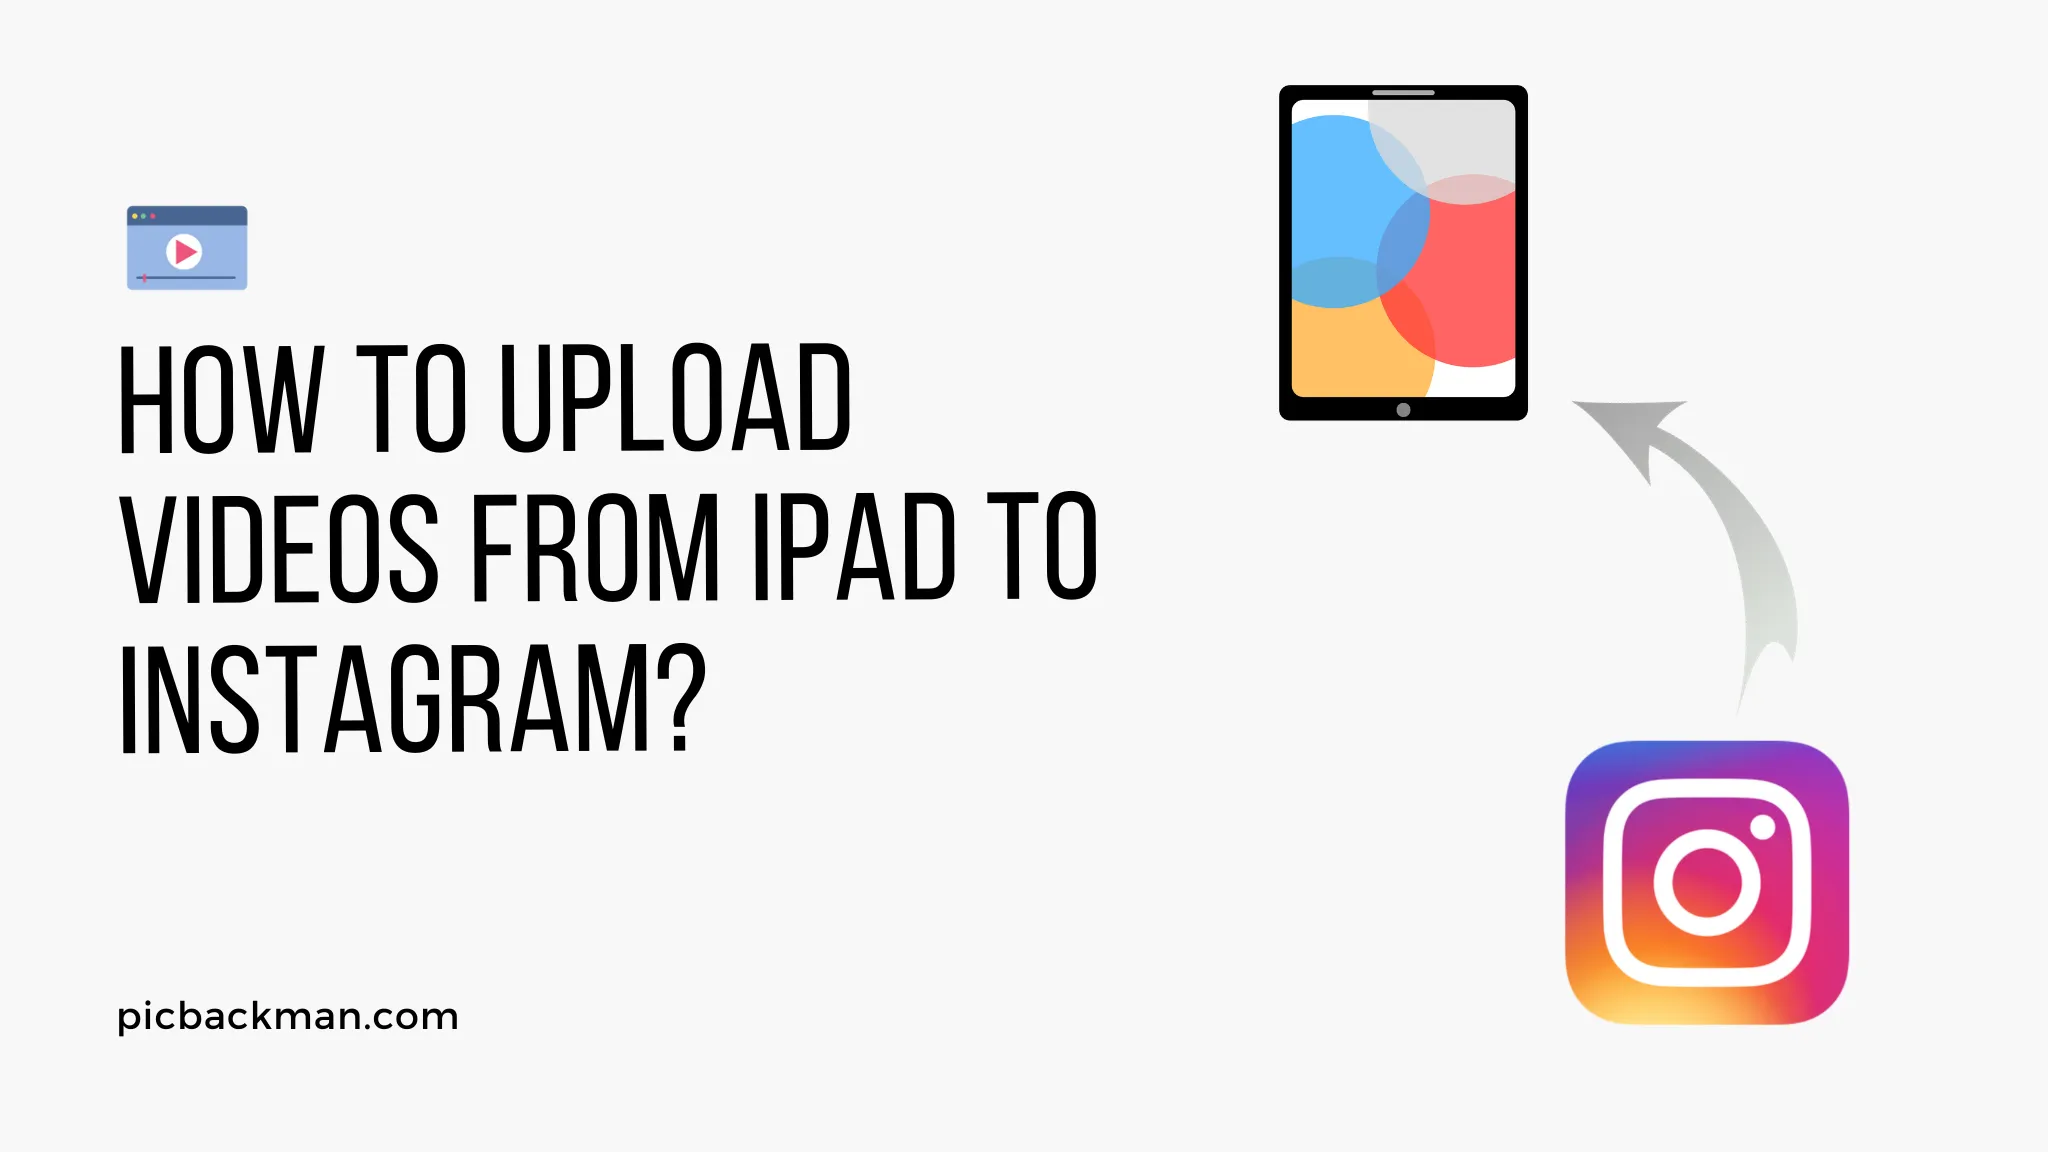 How to Upload Videos from iPad to Instagram?